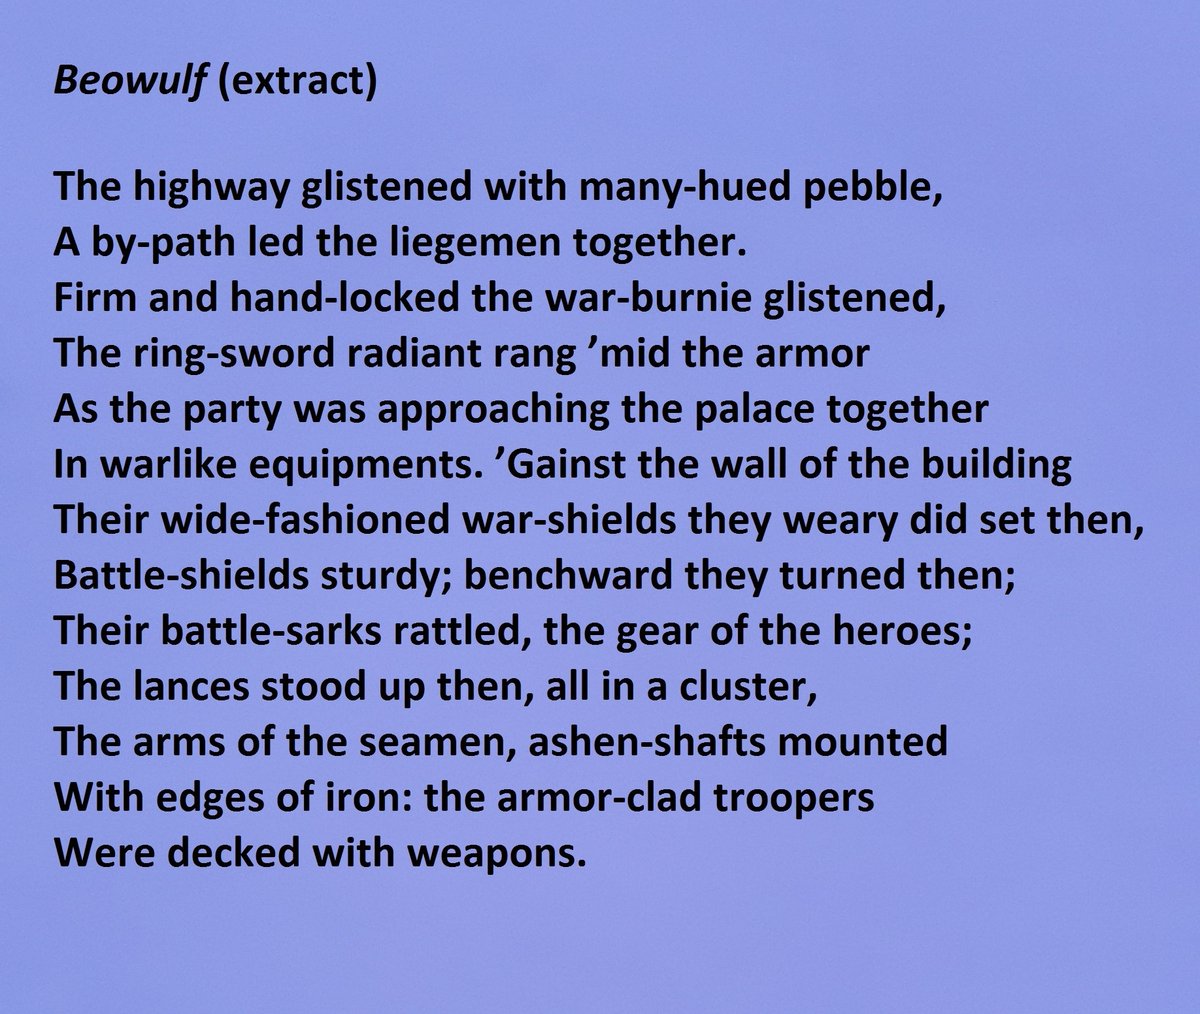 "Beowulf" extract starting with "The highway glistened with many-hued pebble" and ending with "Were decked with weapons."